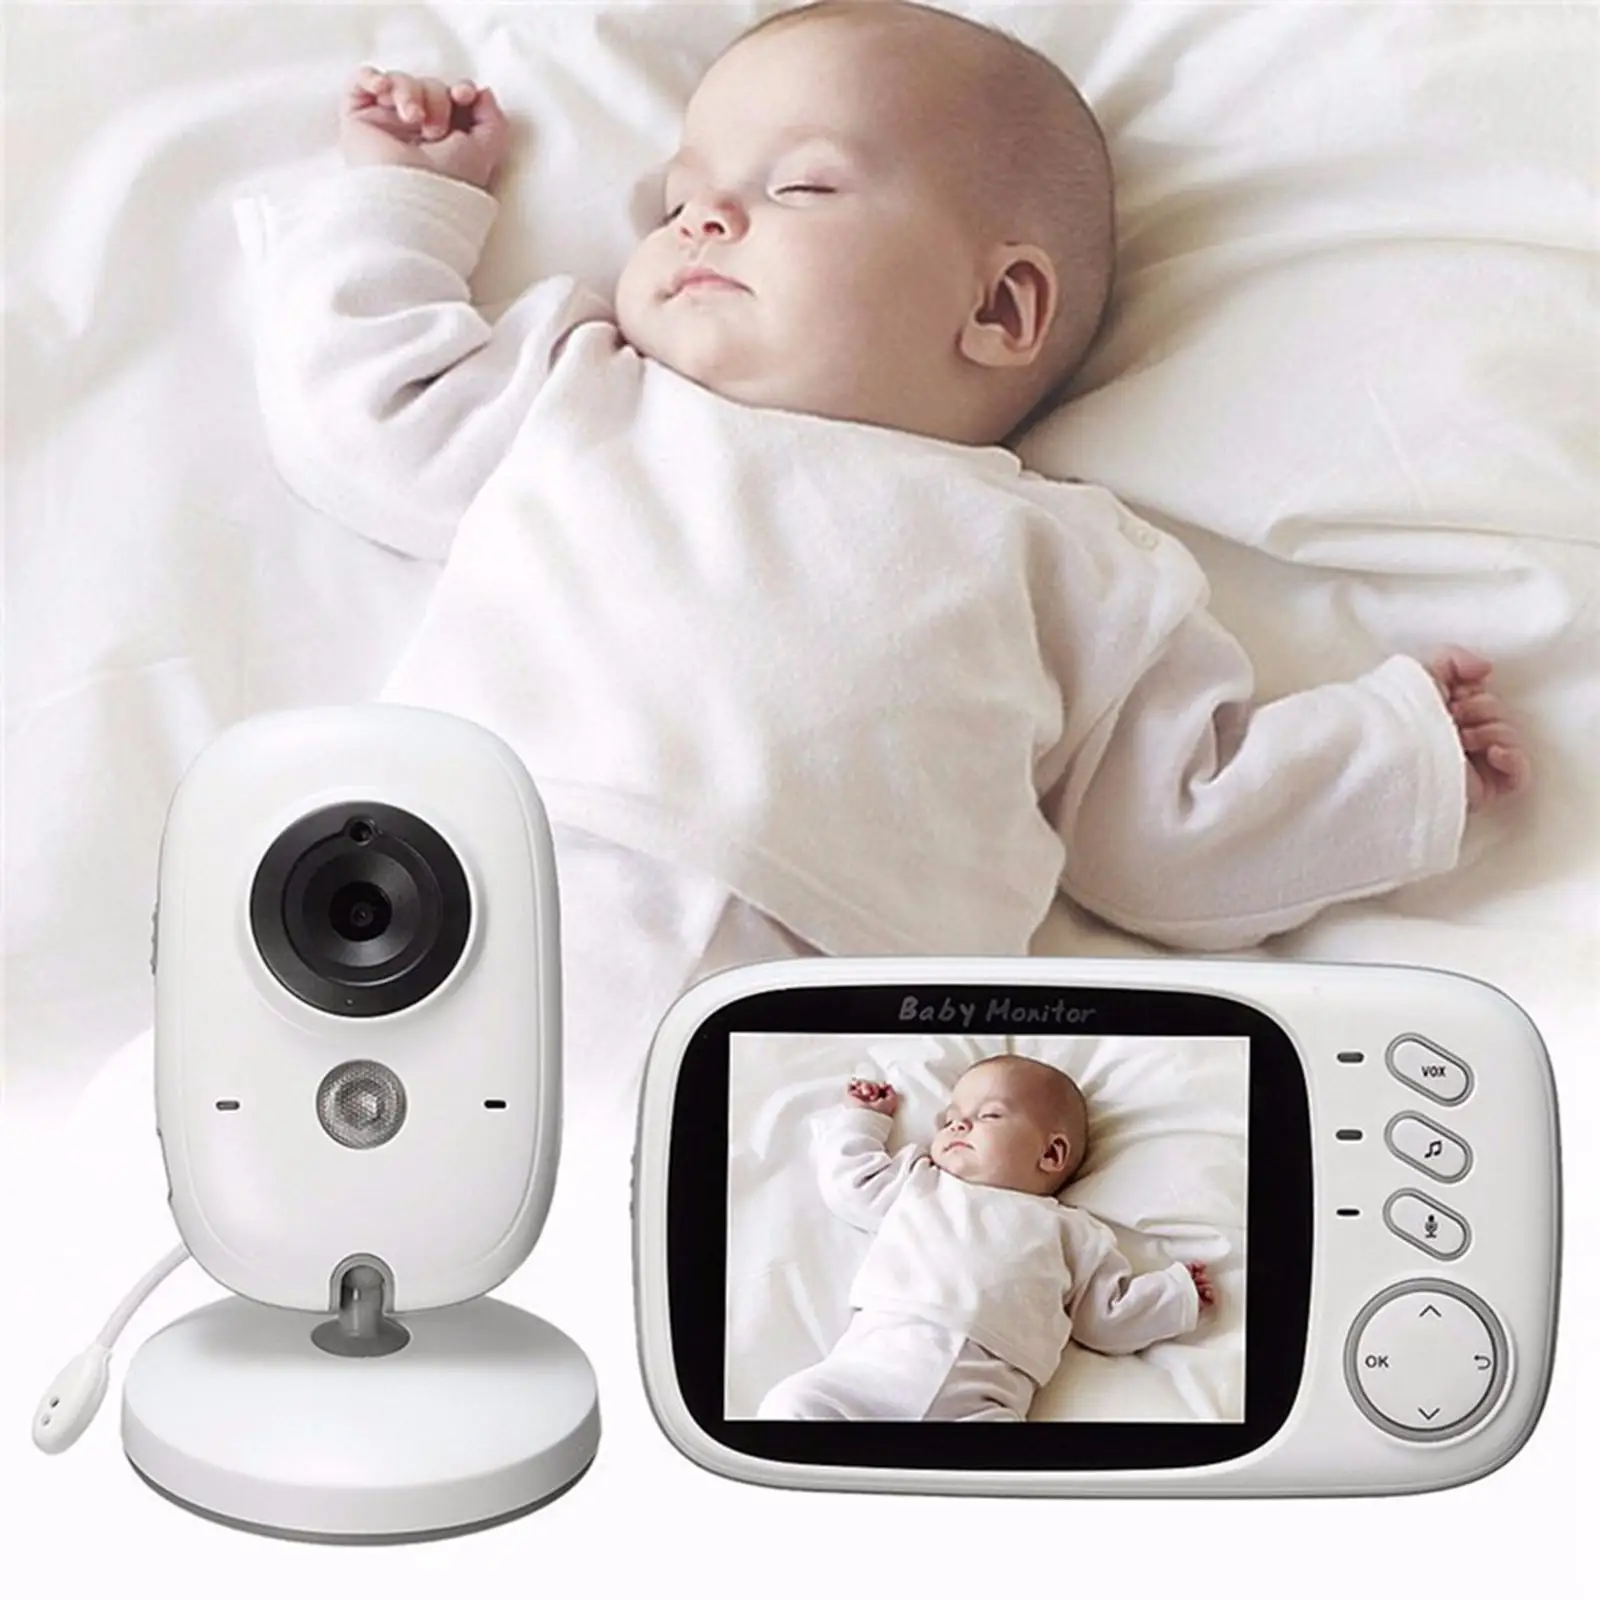 Home Security Camera Two Way Talk Dog Pet Camera Digital Infant Baby Care Indoor Video Color 3.2 inch Screen Portable